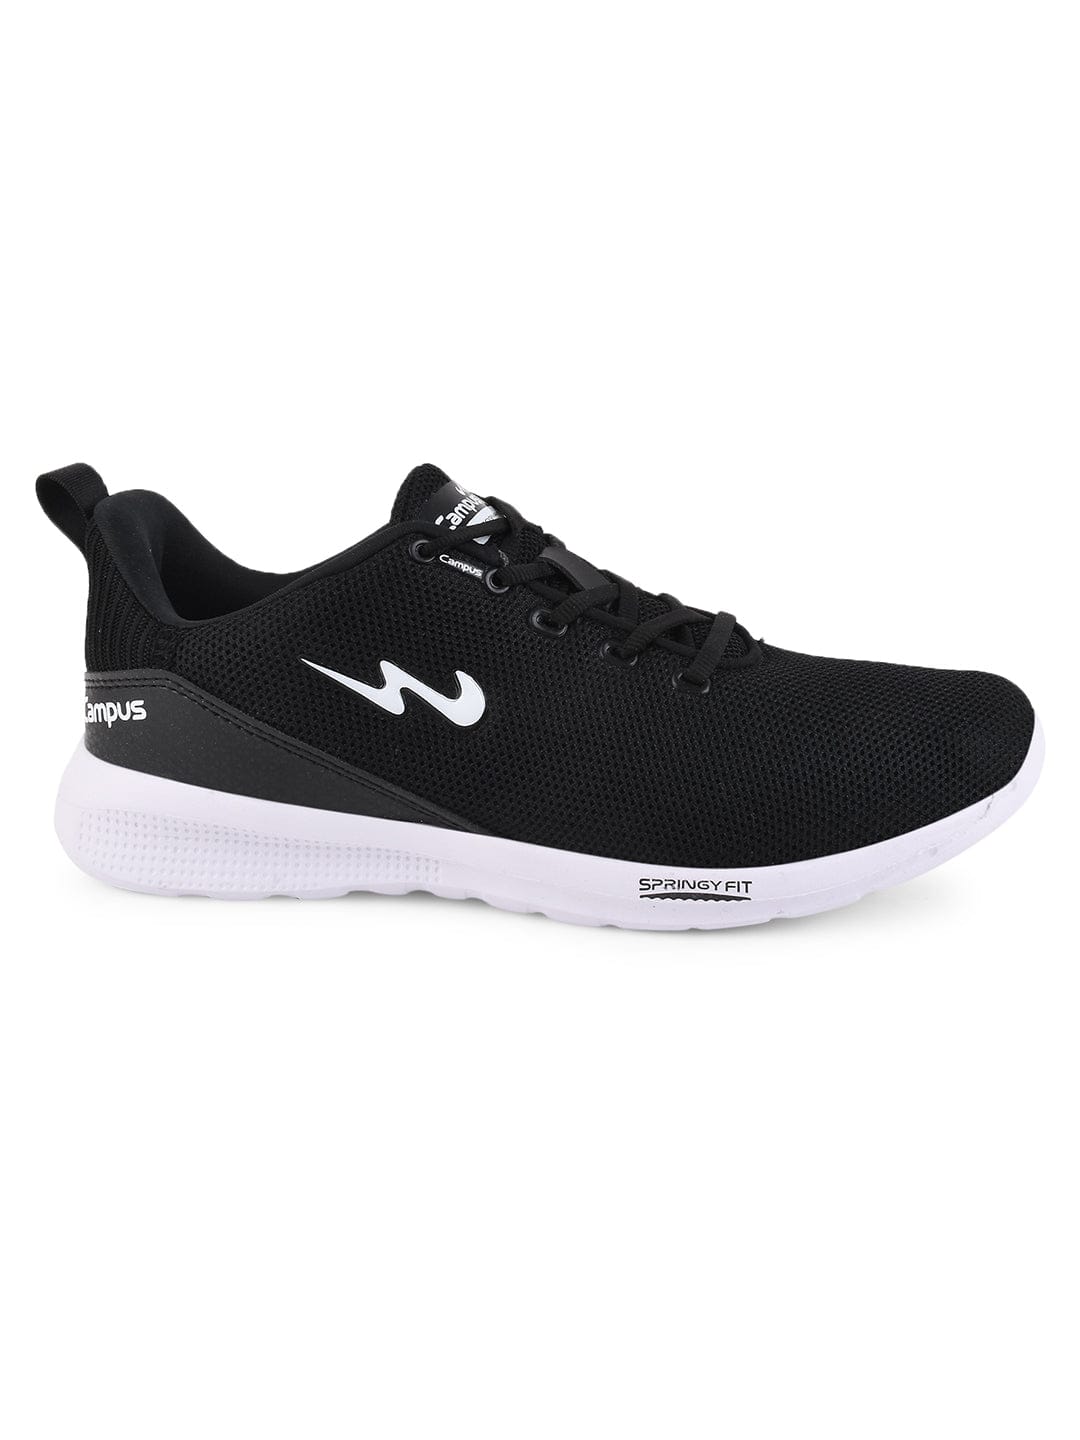 Buy Campus Men's Honor BLK/WHT Running Shoes 6-UK/India at Amazon.in